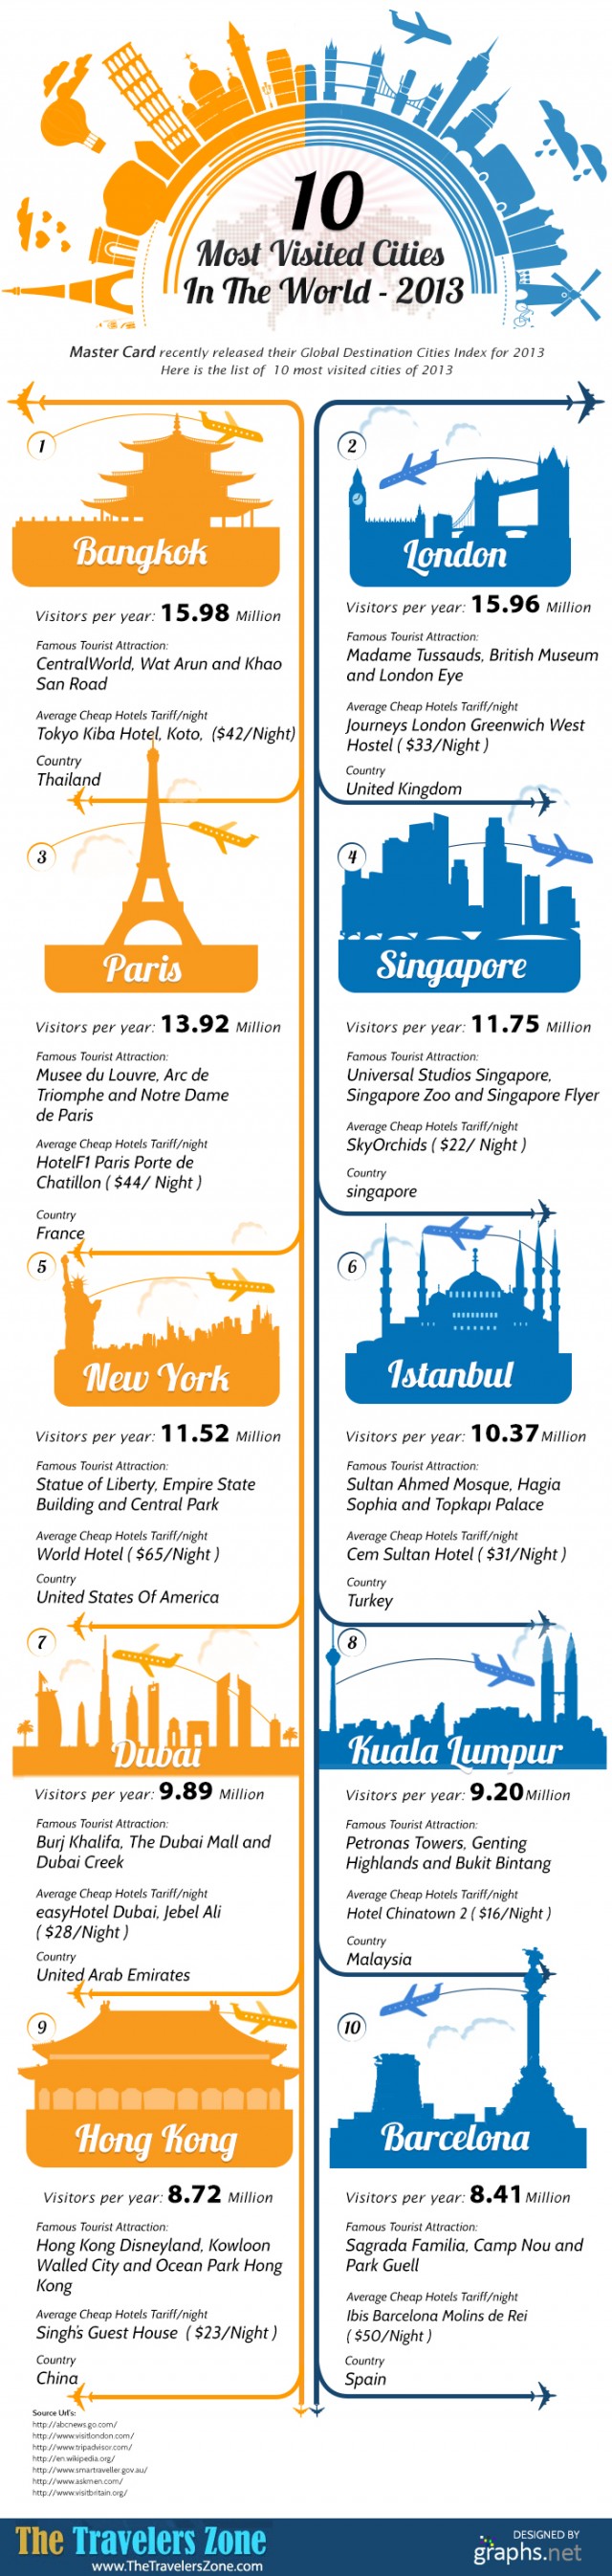 10-most-visited-cities-in-the-world-2013_522f139a34448-640x2692